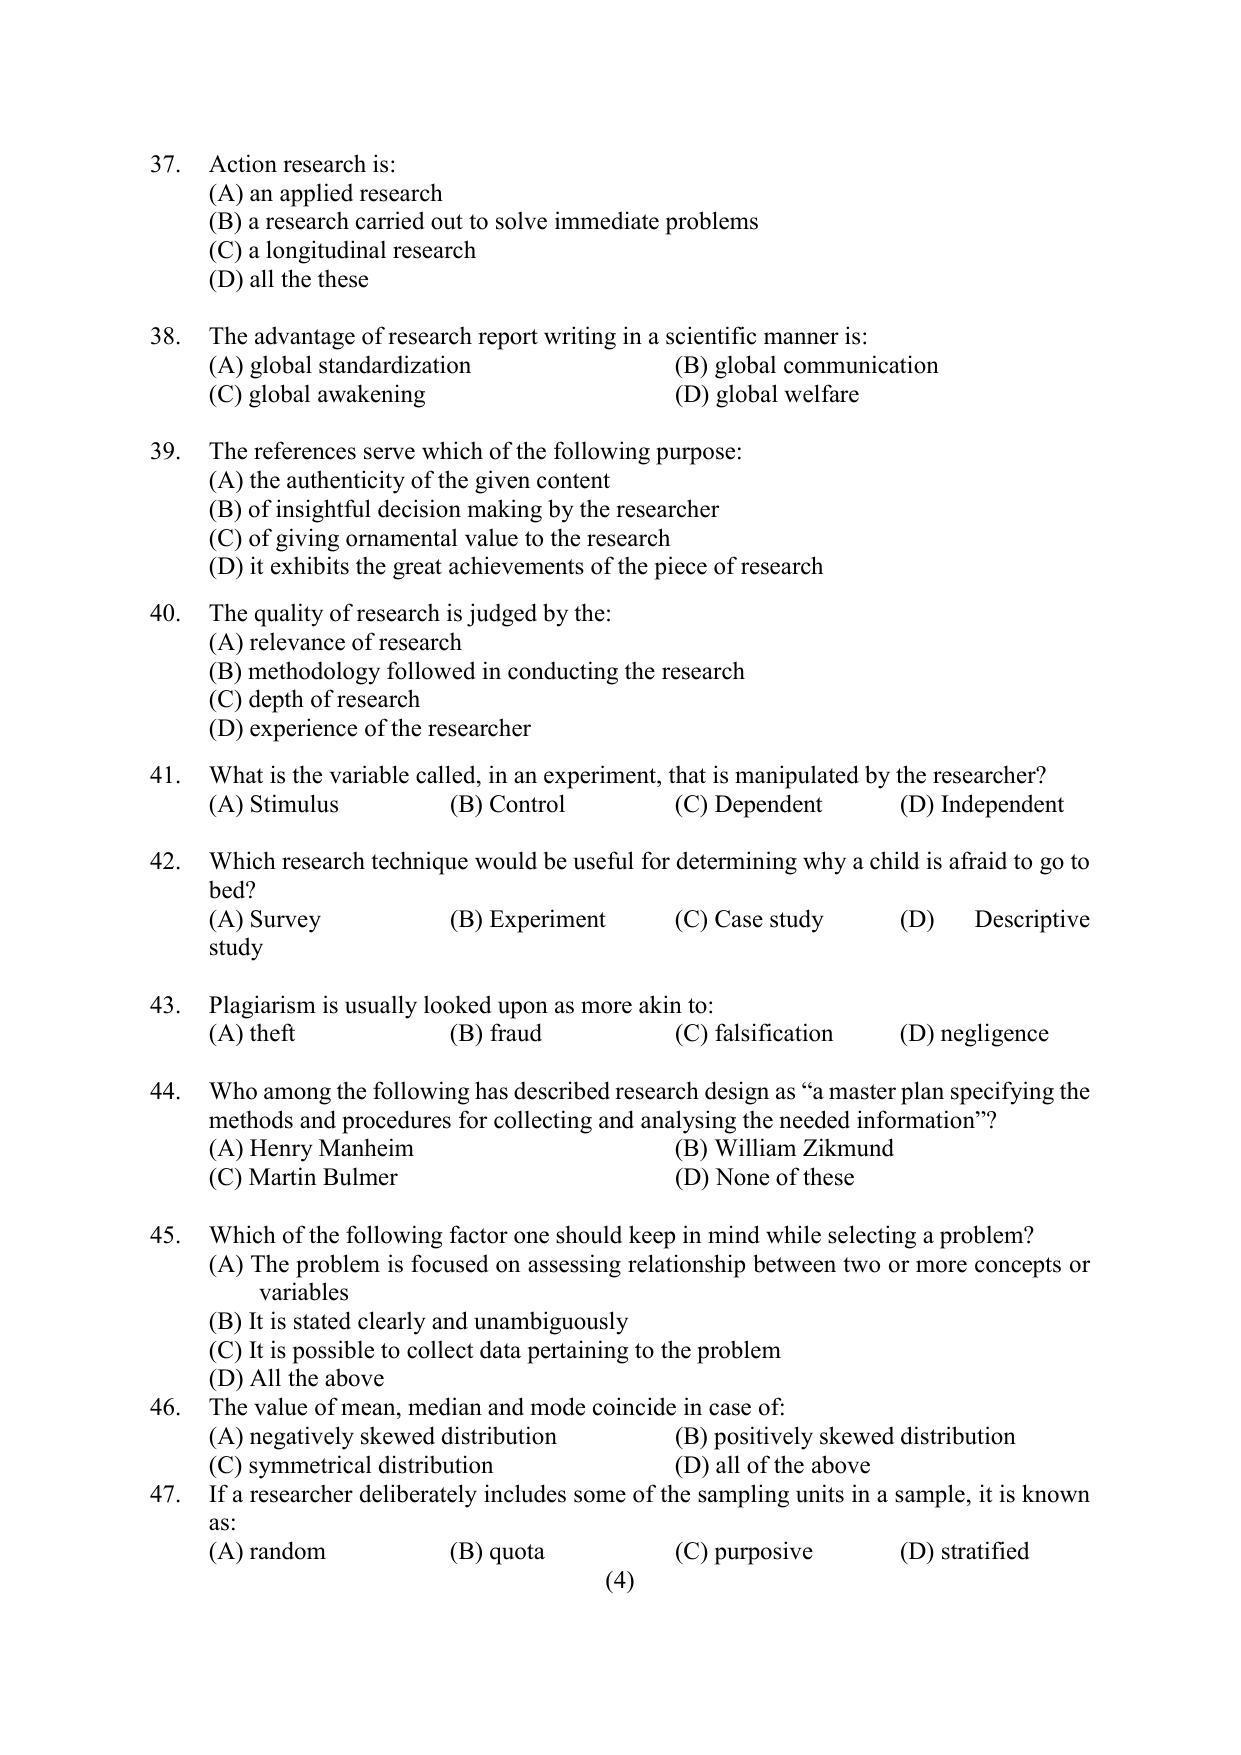 PU MPET Ancient Indian History & Archeology 2022 Question Papers - Page 42